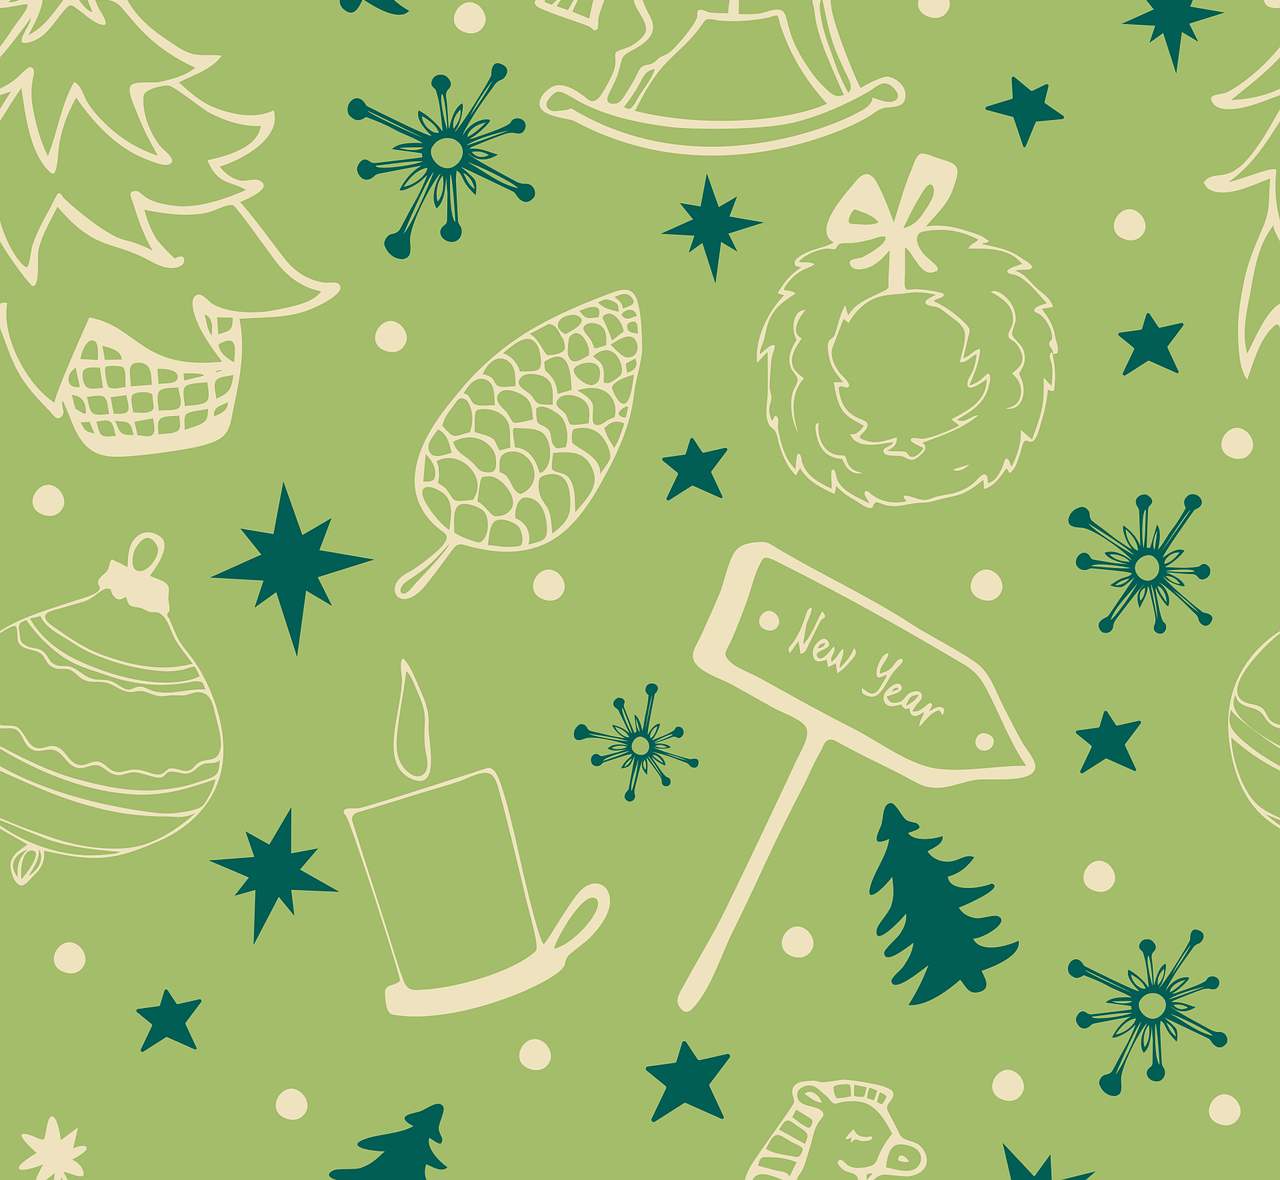 Abstract design of holiday items that include a wreath, tree, candle, snowflake, and star